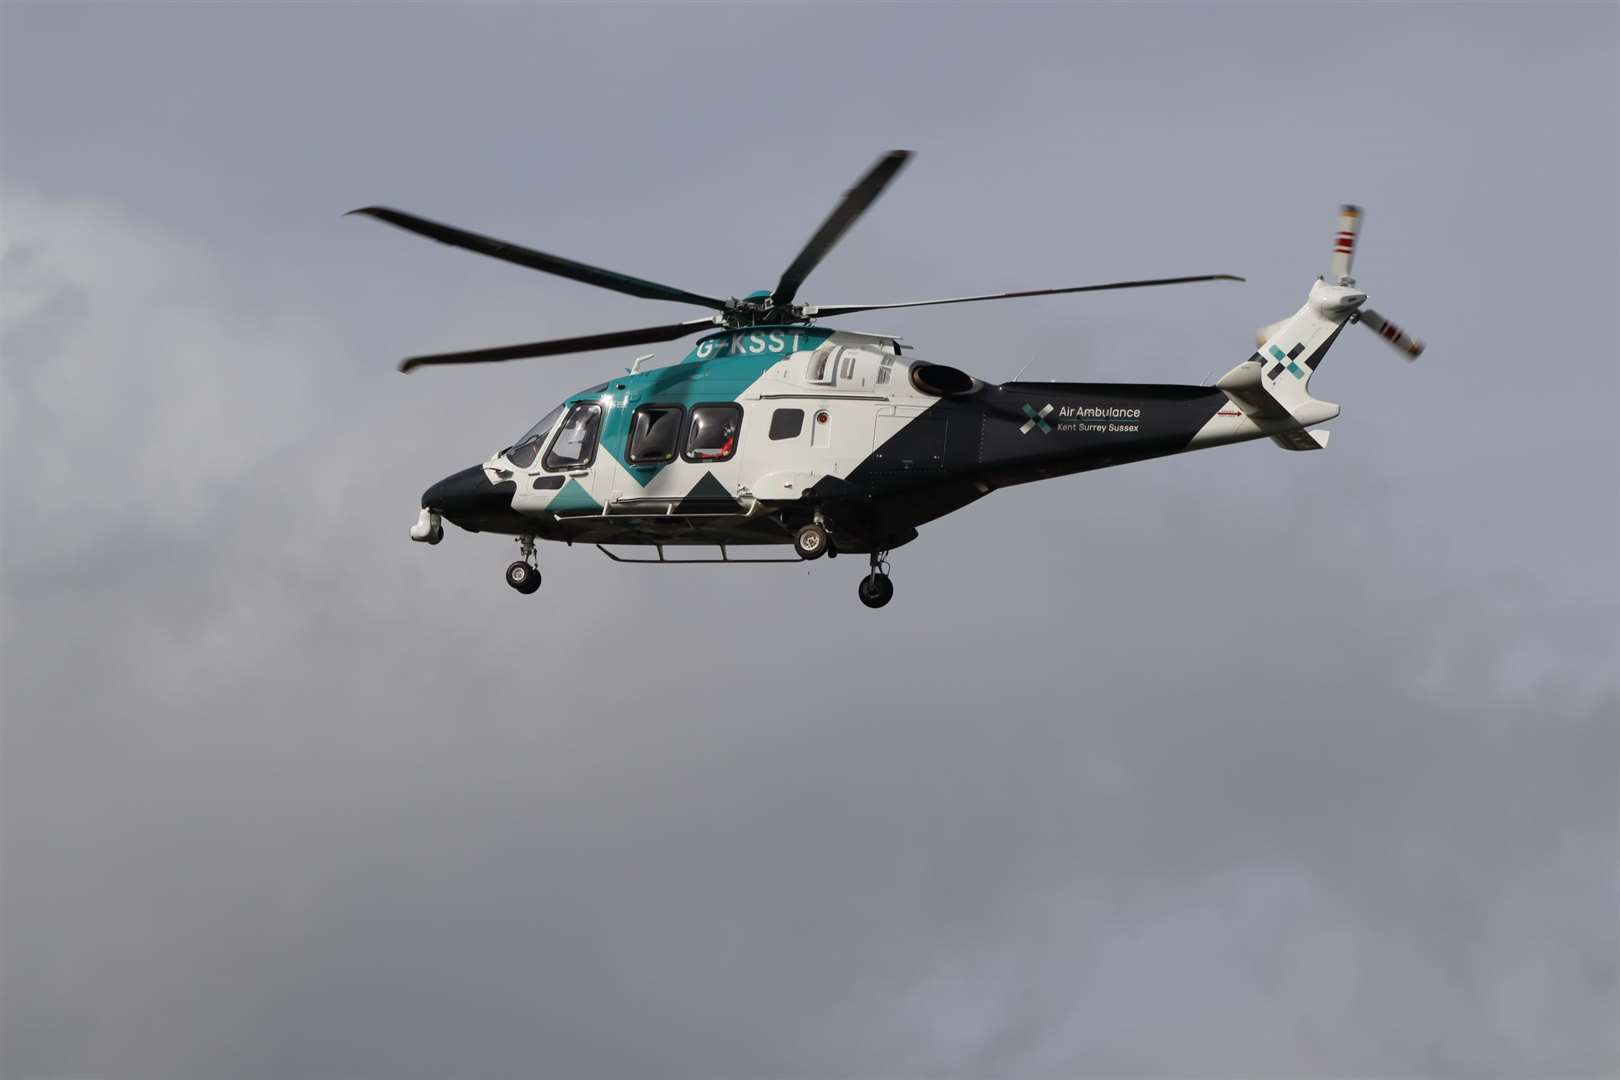 The Kent Surrey and Sussex air ambulance helicopter landed at the scene. Stock photo